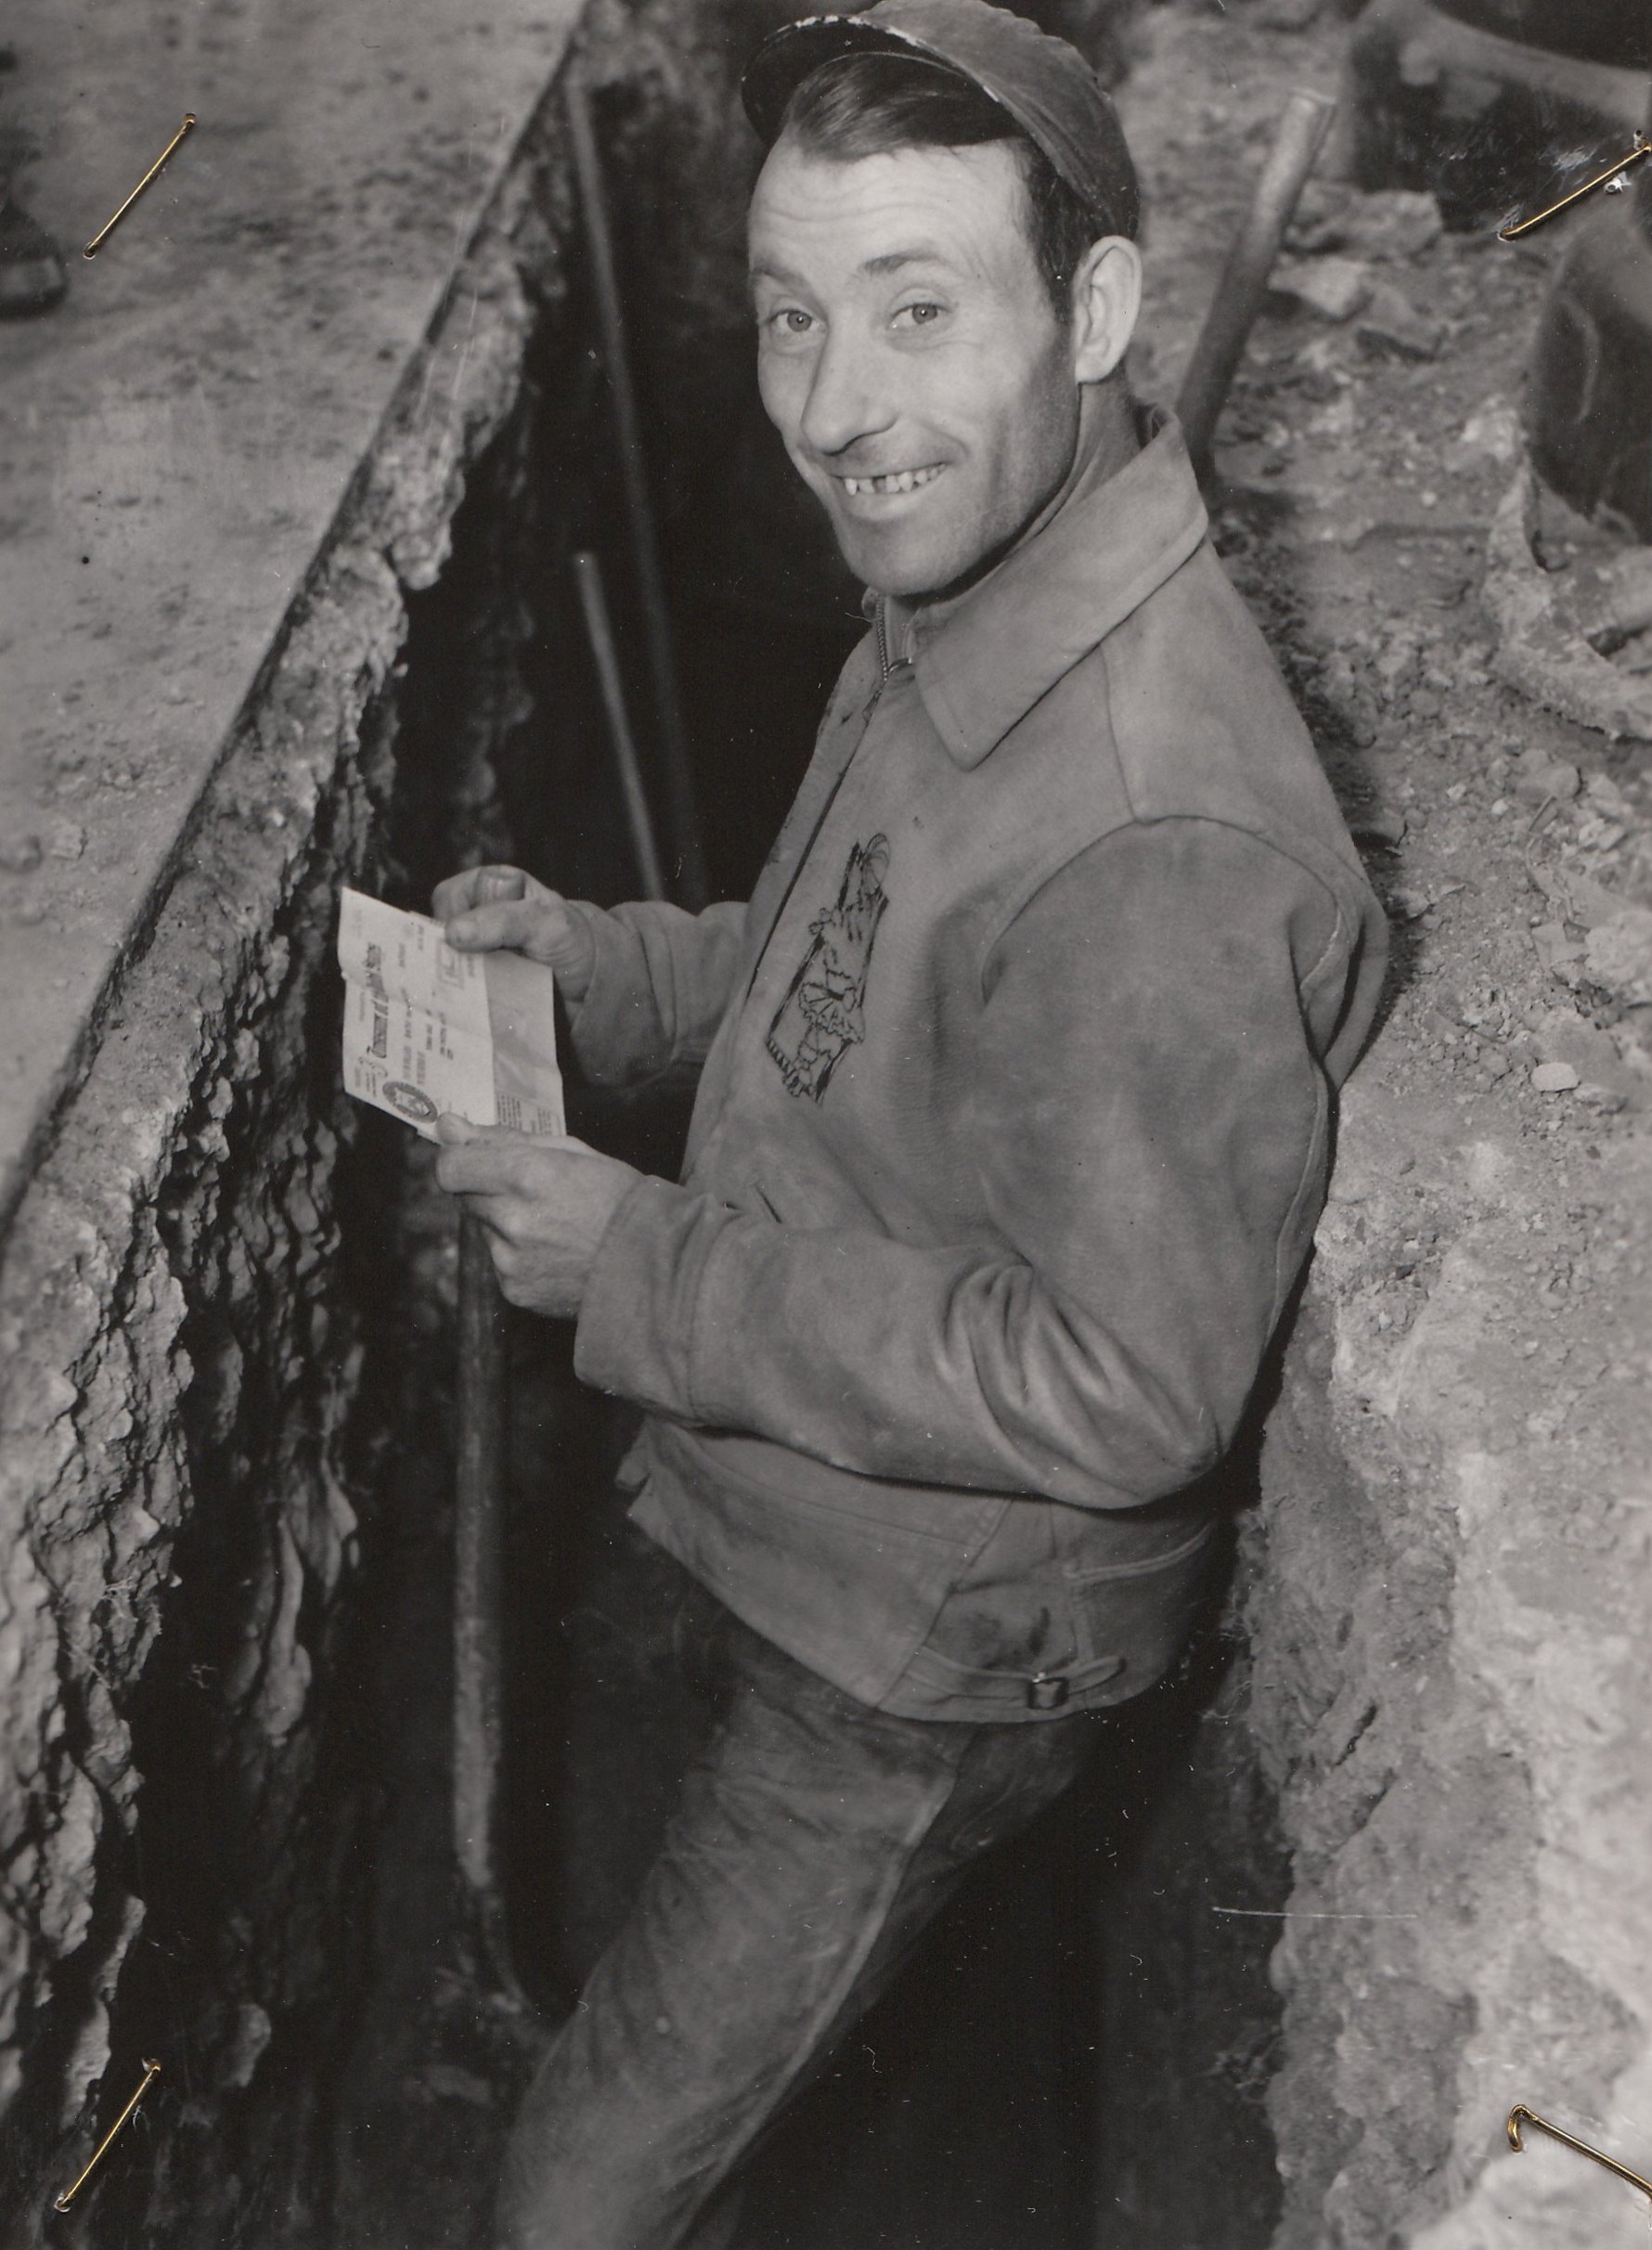 A WPA paycheck brings a smile in Washington, DC. Photo courtesy of the National Archives (January 1939).